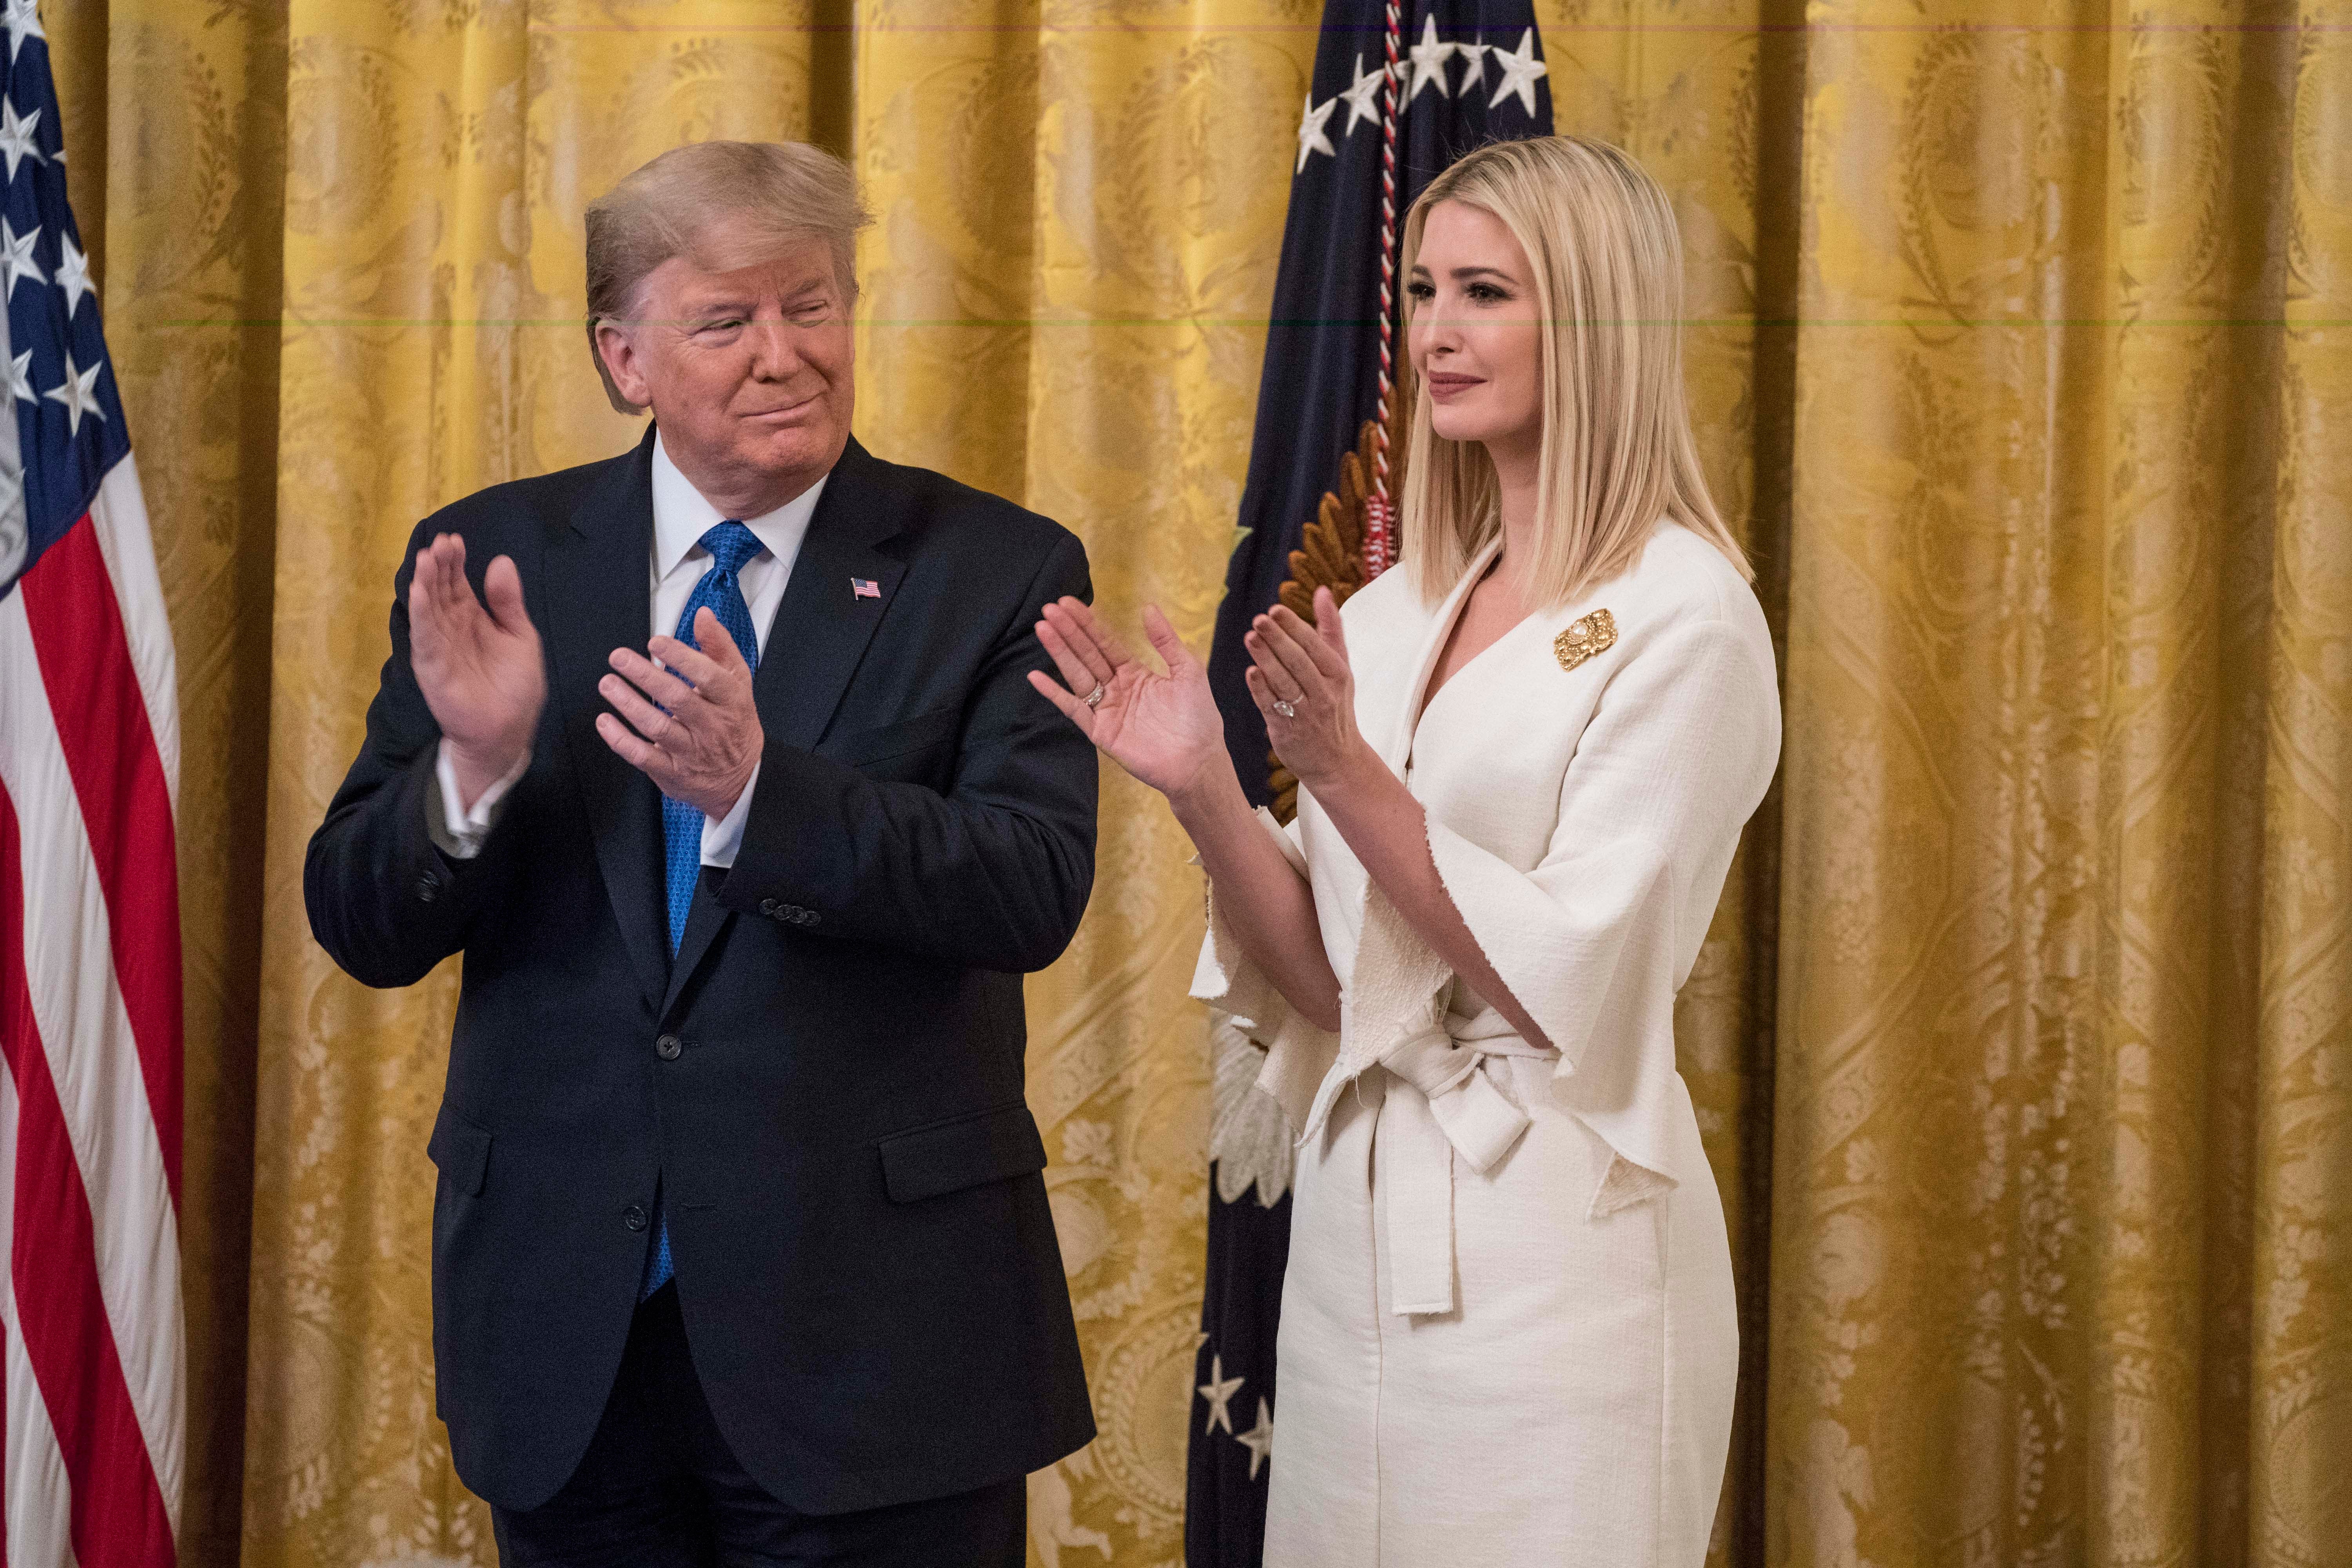 Ivanka Trump also served as a special advisor to her father during his administration